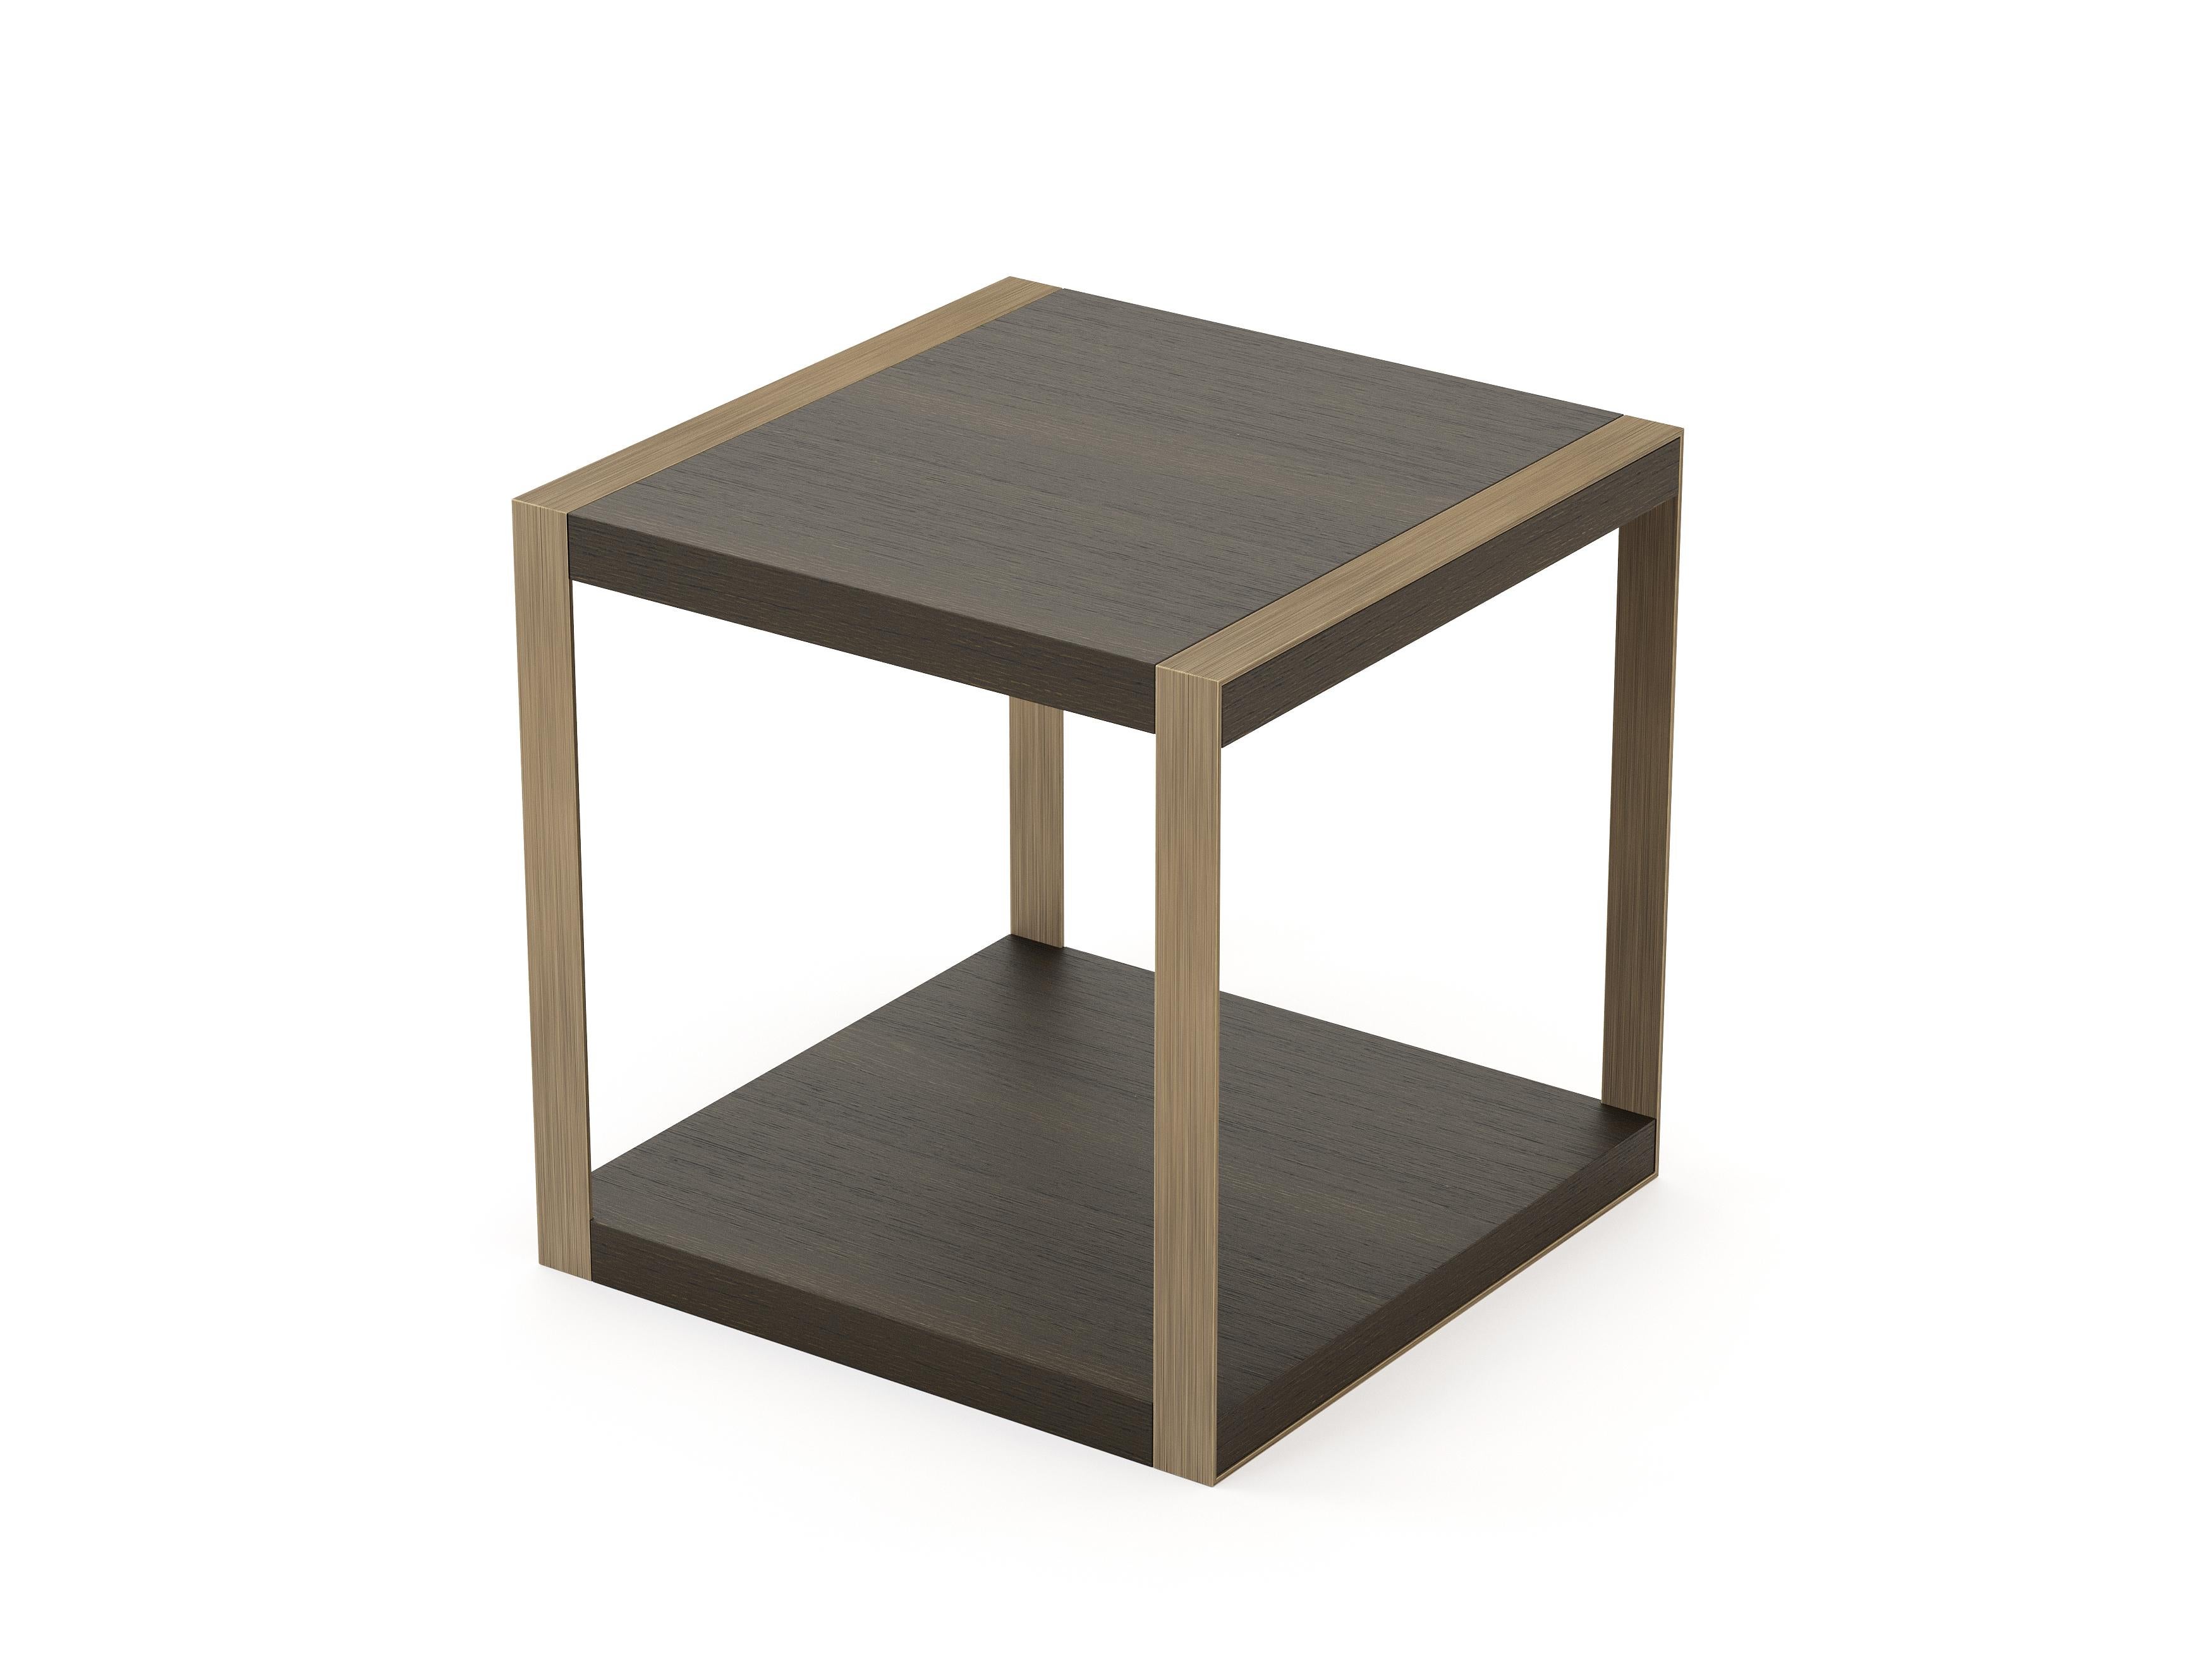 Portuguese Mid-Century Modern style Empire Side Table made with oak and brass, Handmade For Sale